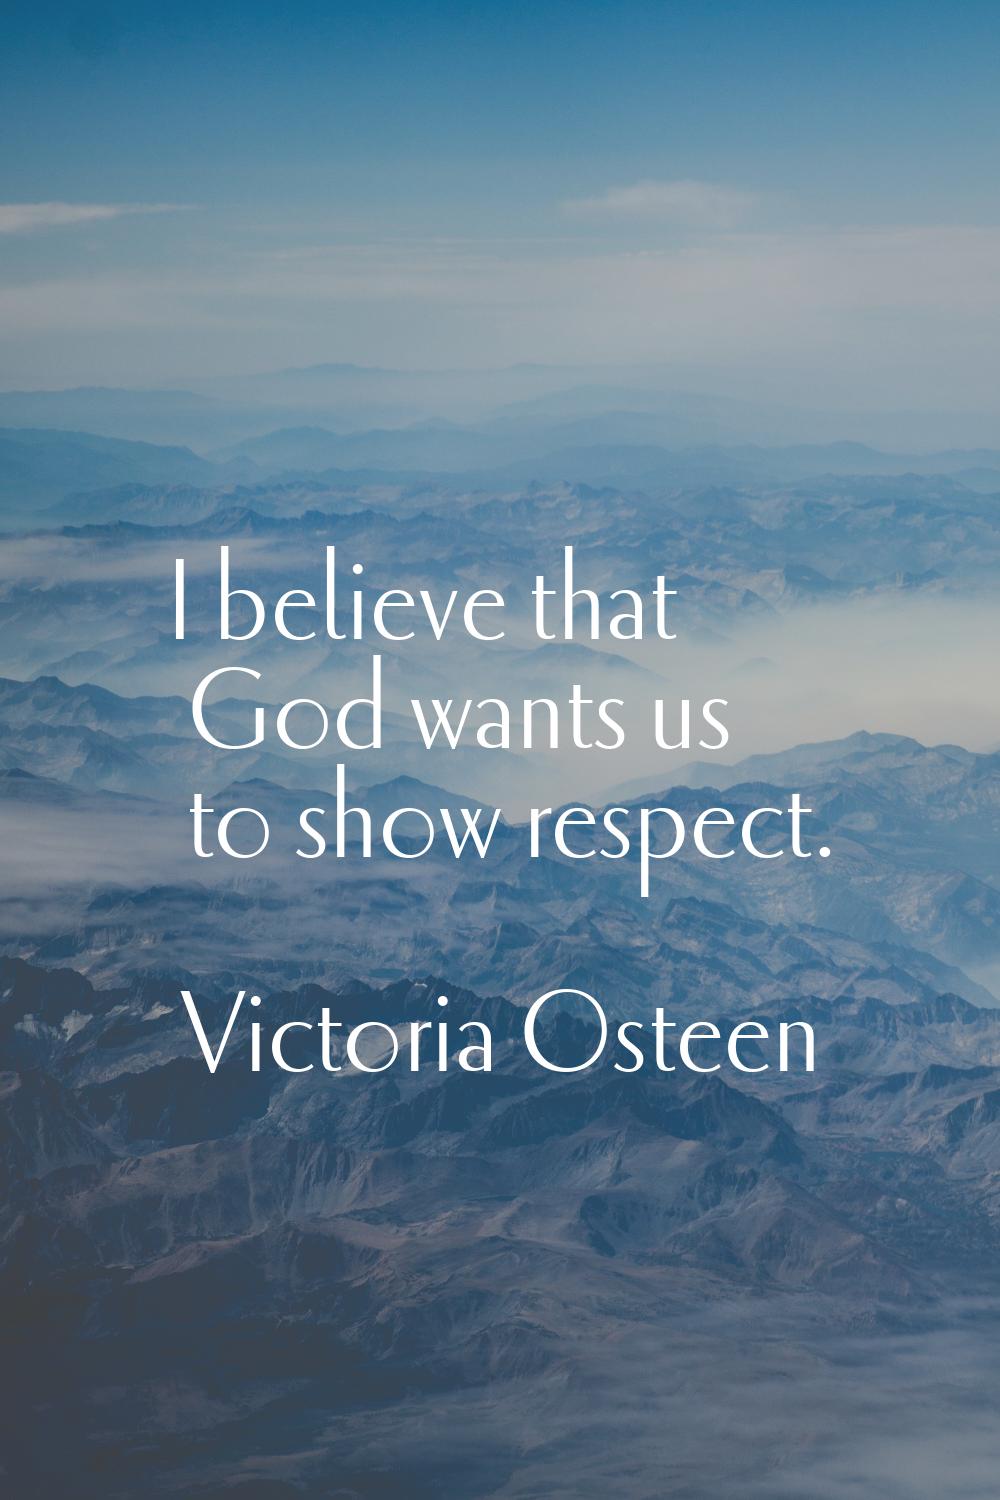 I believe that God wants us to show respect.